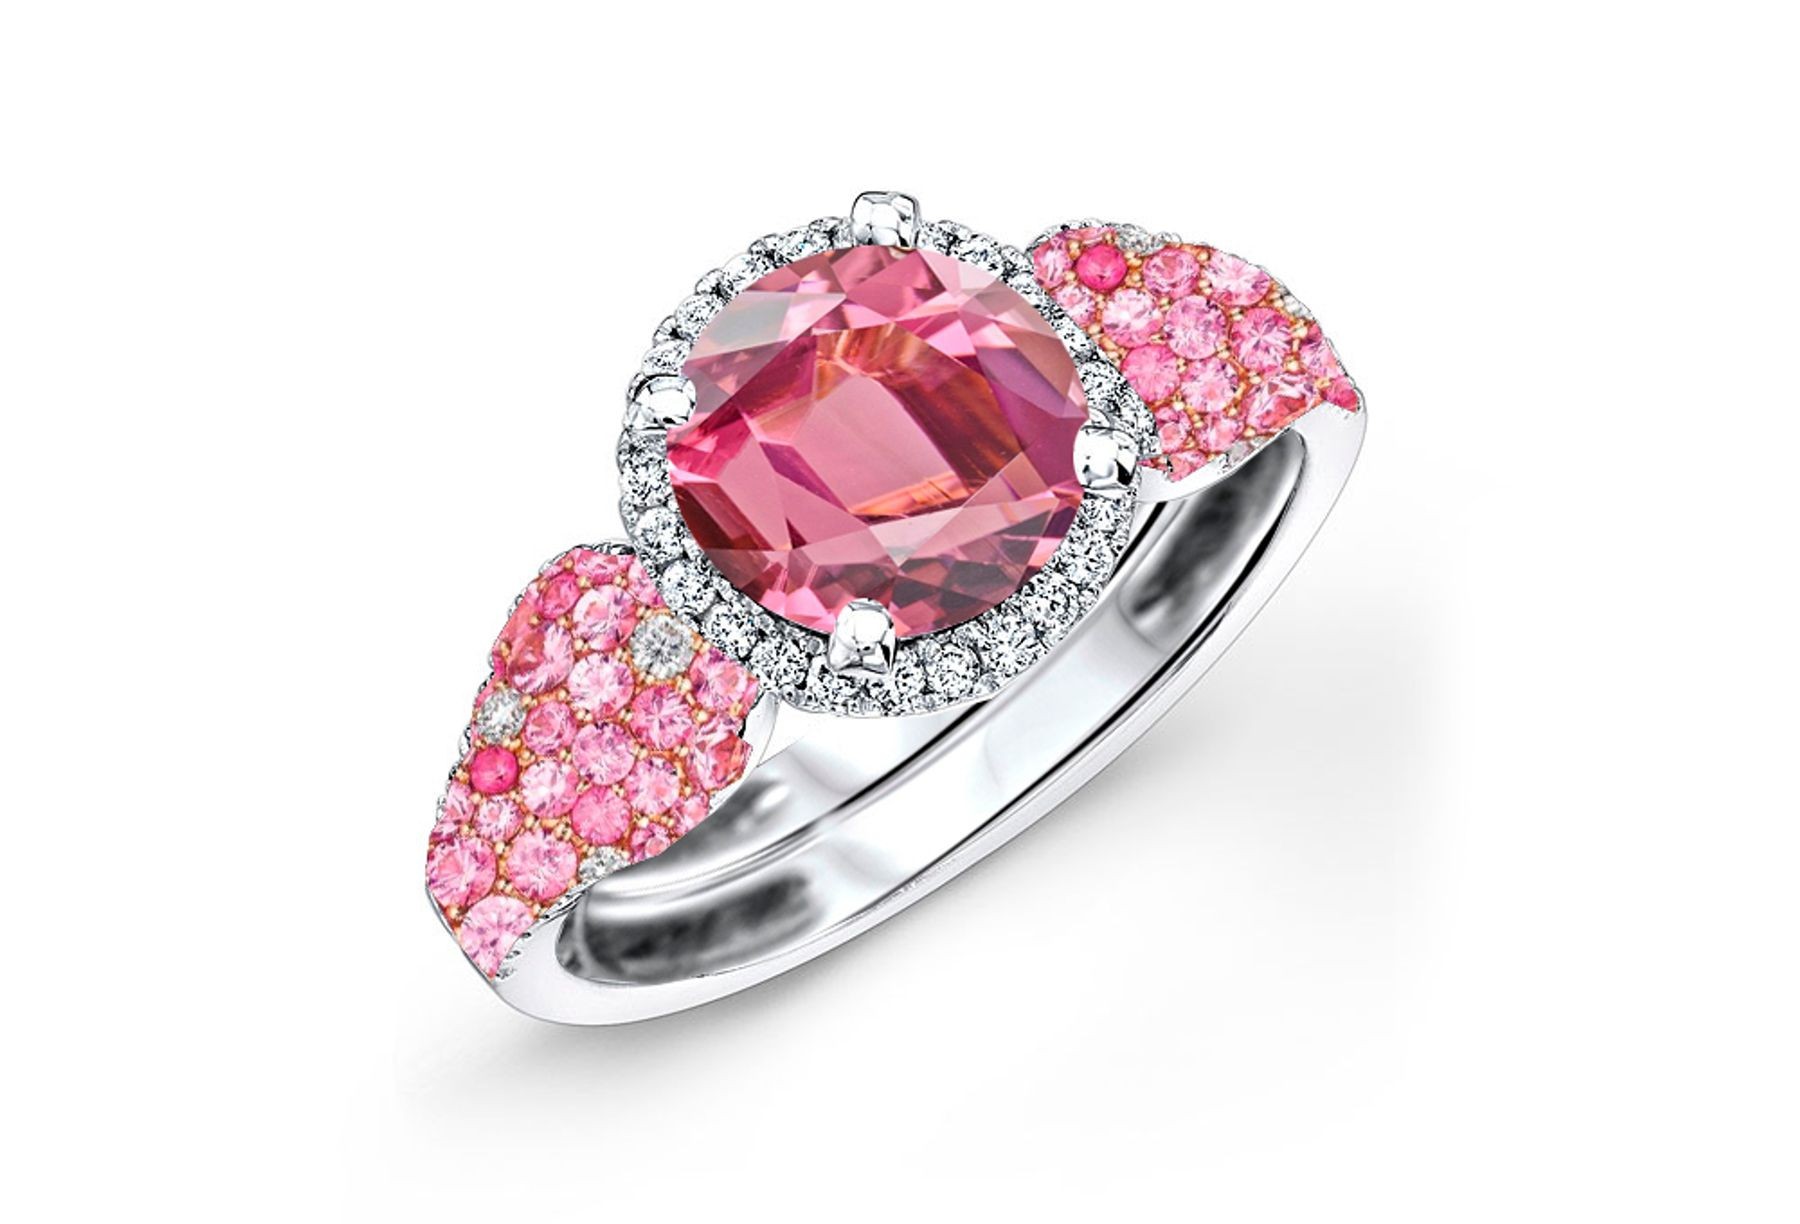 Made To Order Rings Featuring Delicate French Halo Pave Diamonds & Vivid Pink Sapphires